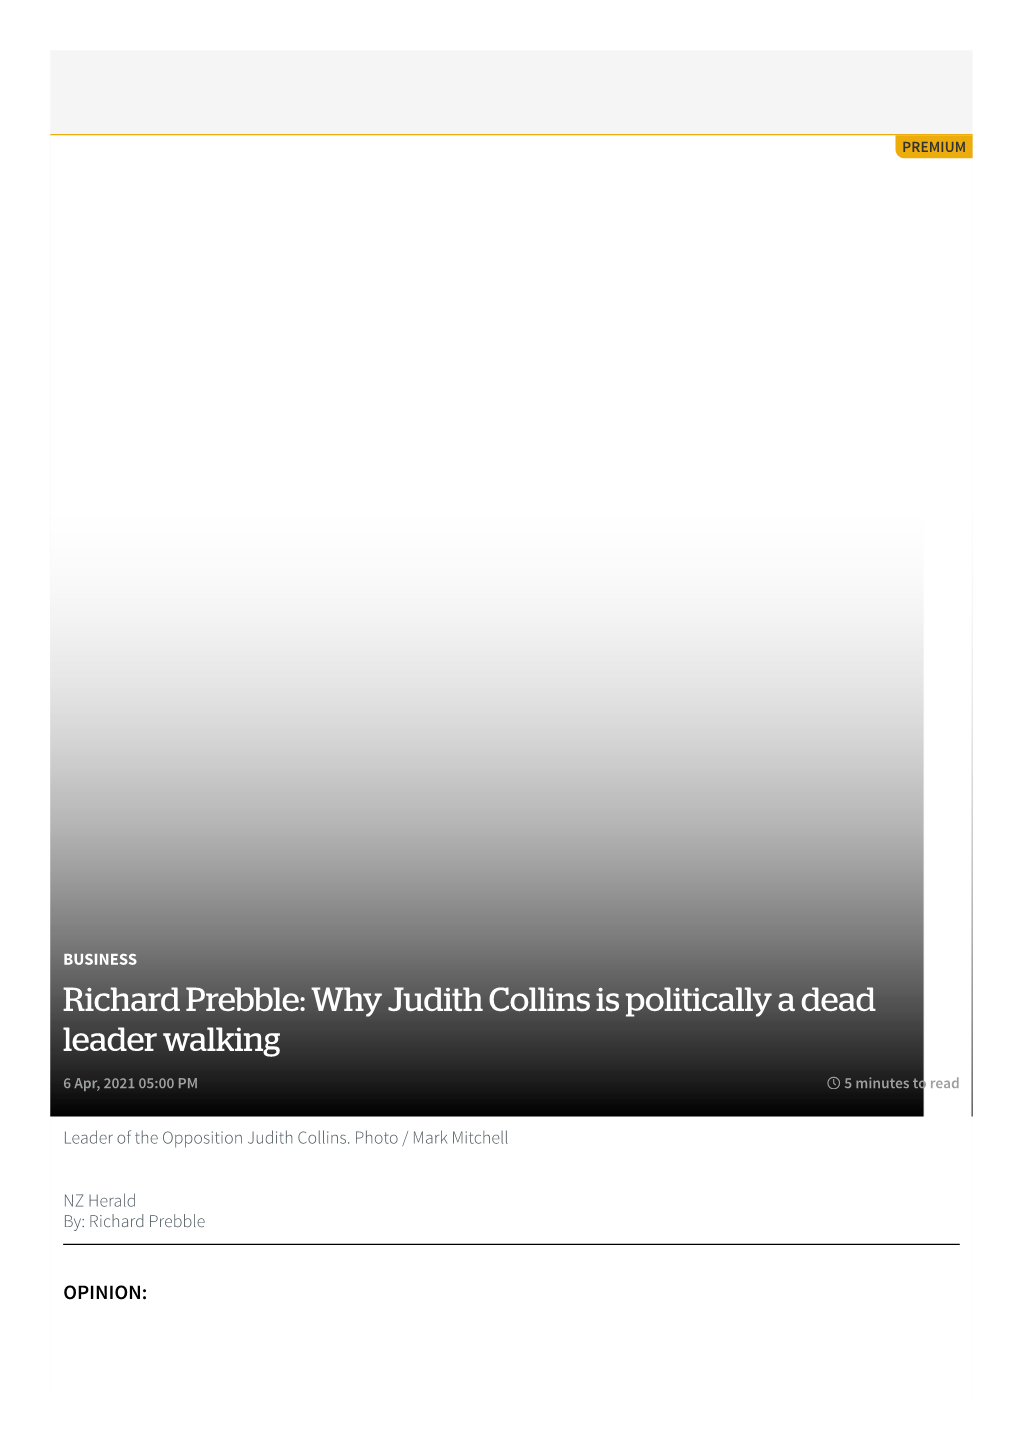 Richard Prebble: Why Judith Collins Is Politically a Dead Leader Walking